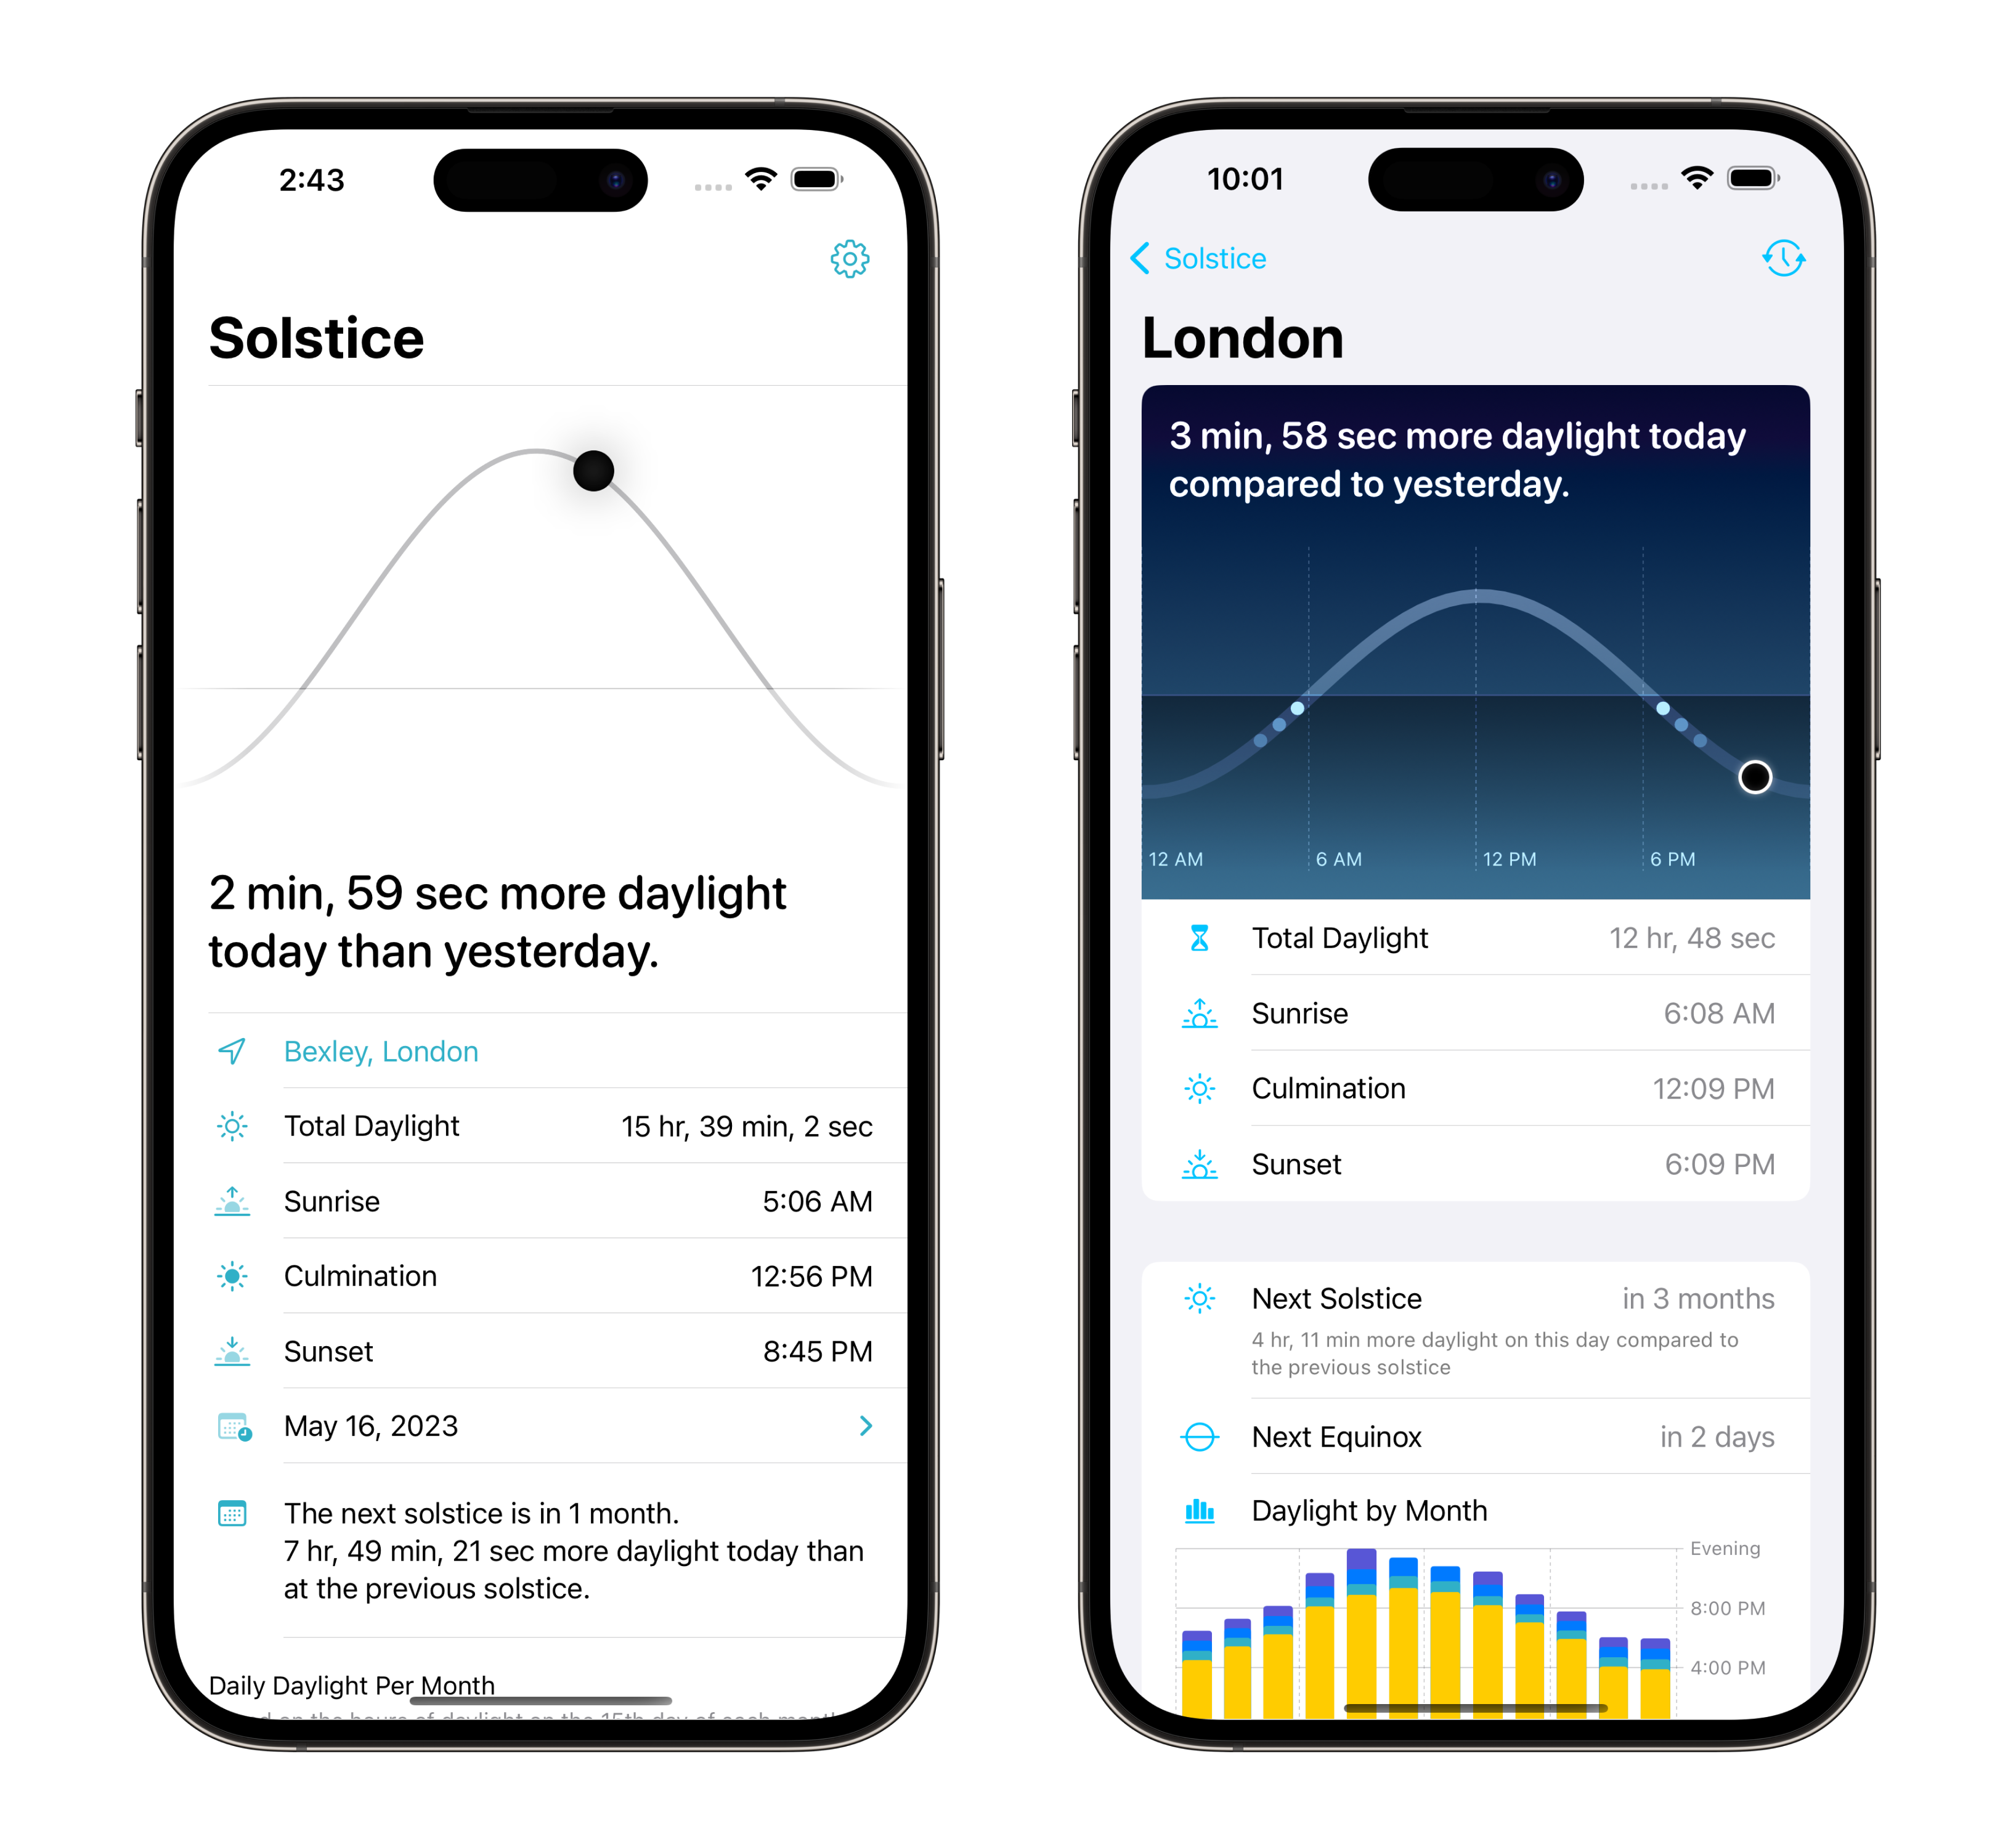 Two iPhones showing Solstice version 1 and version 2 side-by-side. Version 1 features a monochrome black-and-white design with limited use of color to denote interactive controls. Version 2 has a lot more color by comparison, showing a graphical chart that emulates the sky's appearance, and colorful bar charts indicating the daylight length changing over the year.